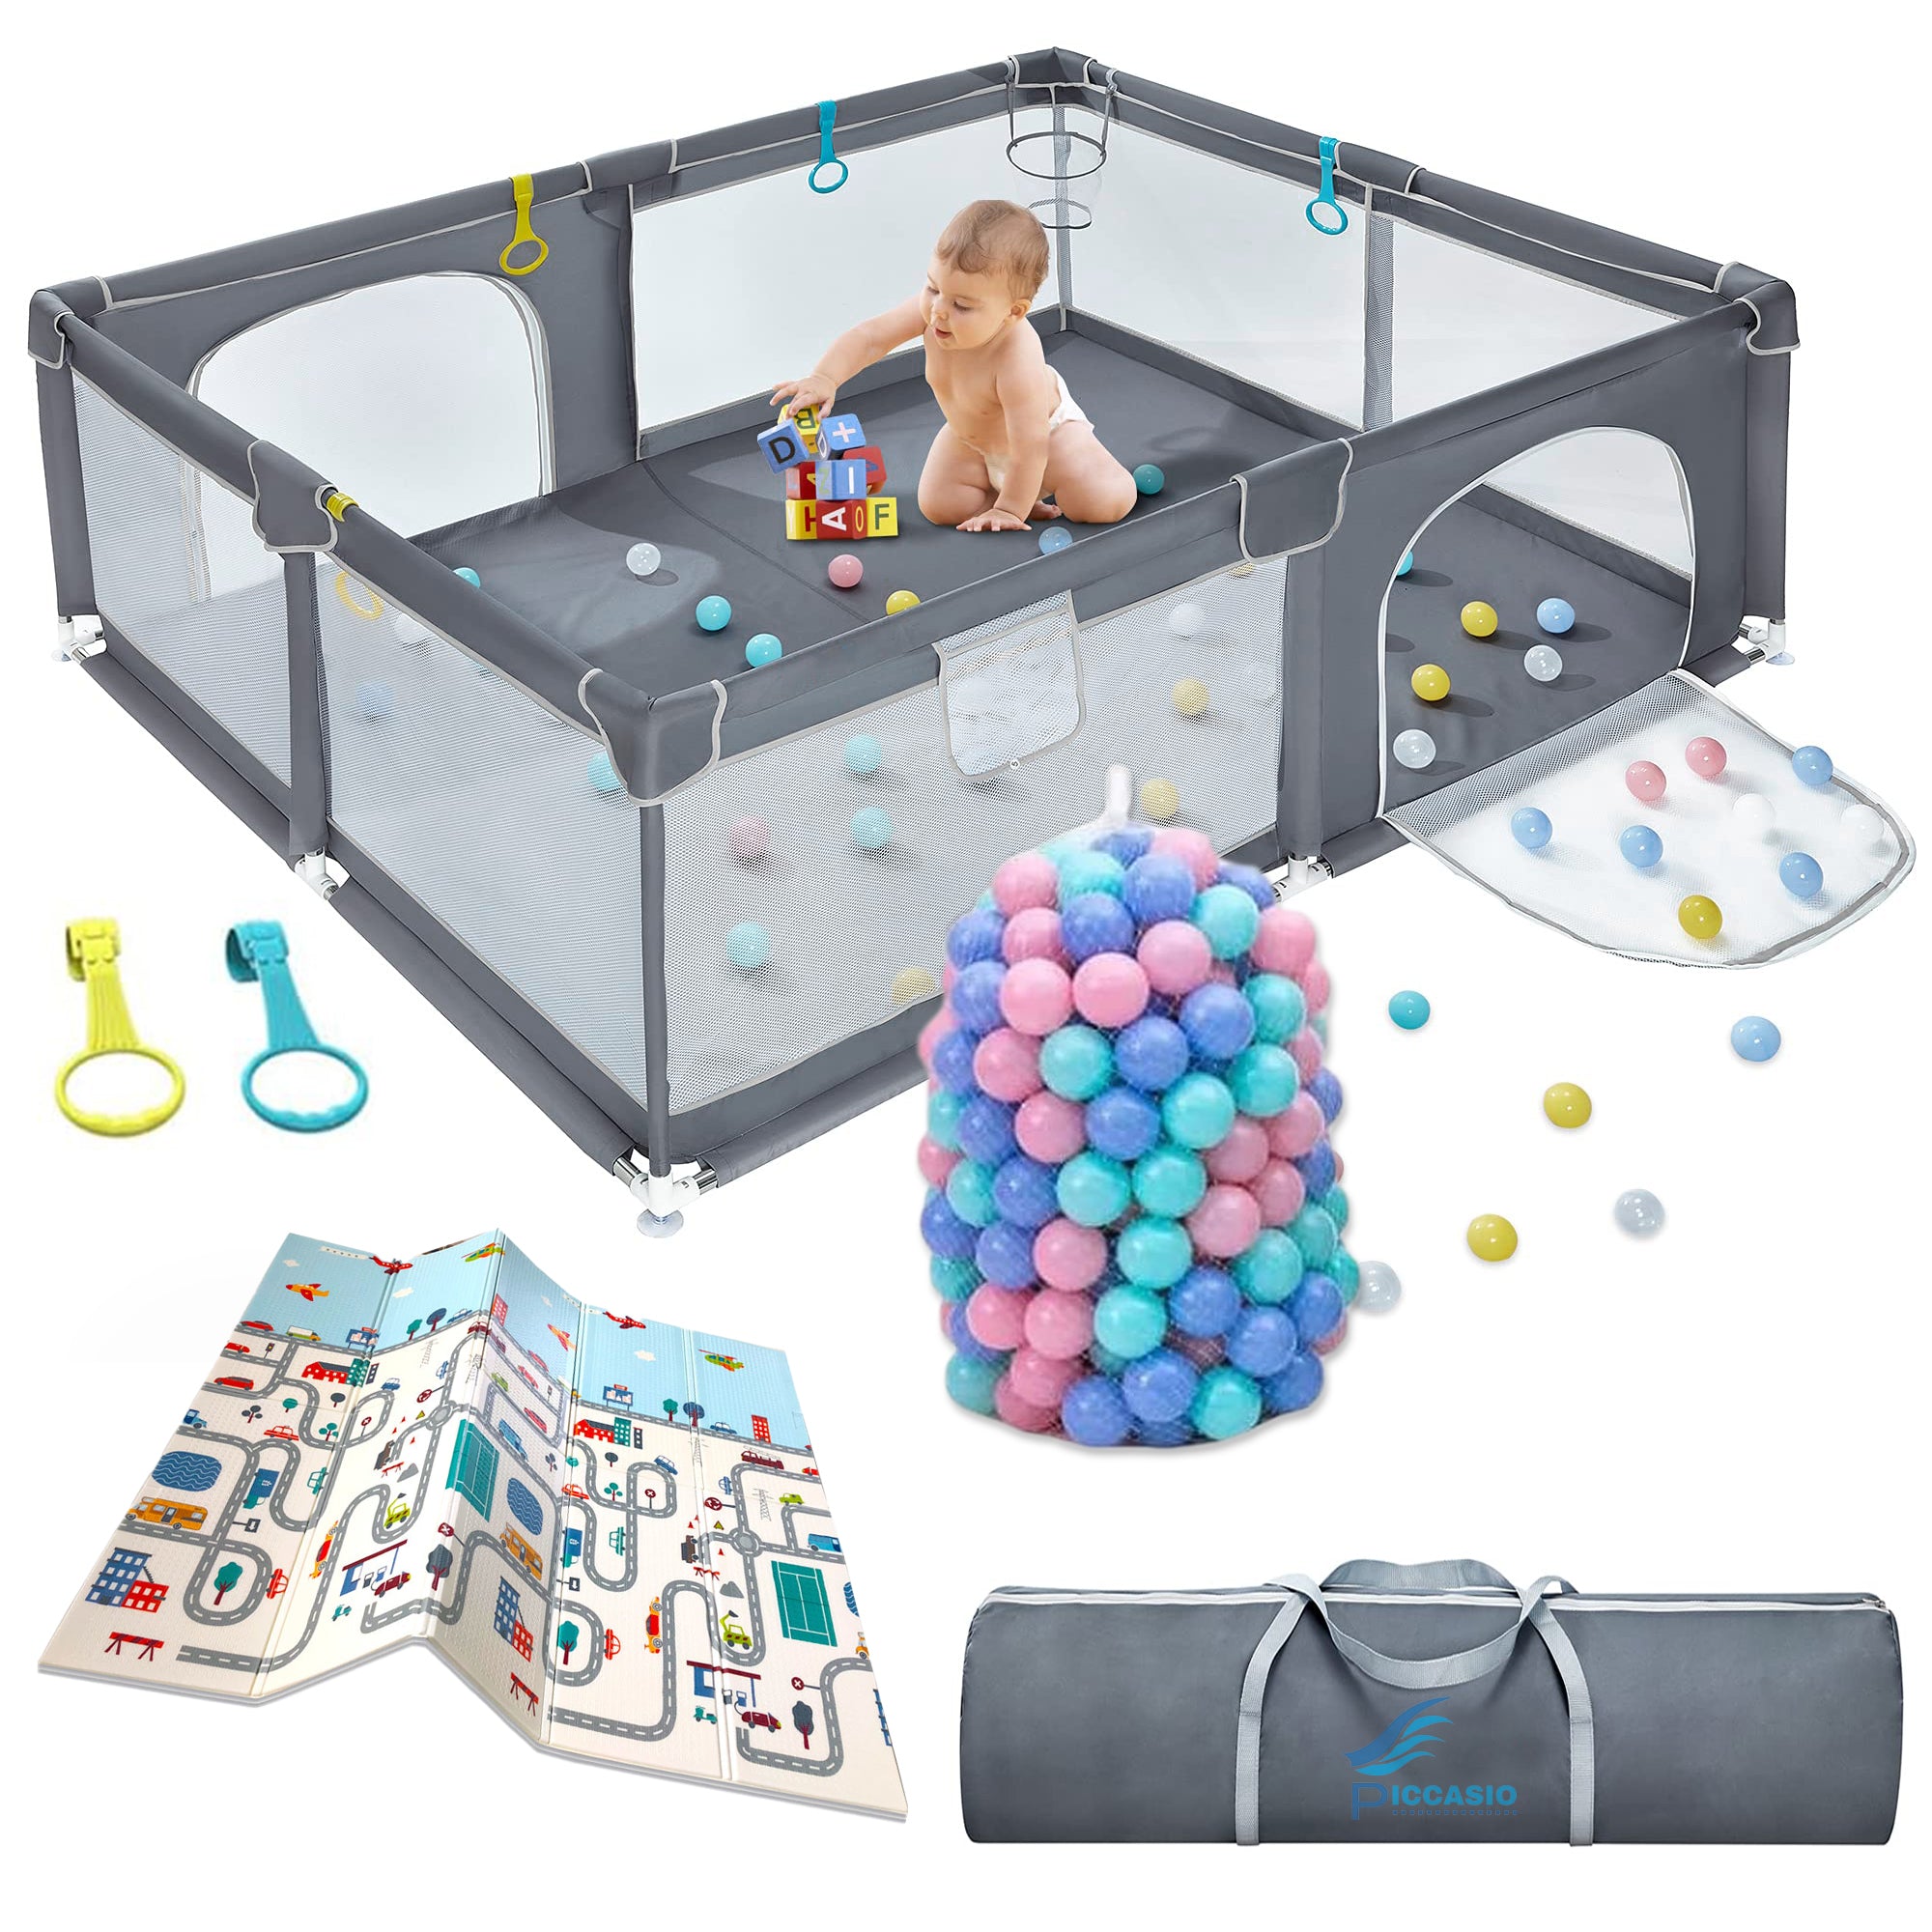 Playpen Baby Large Size Playpen, set up and fold down, Best Baby Playpen extra-large